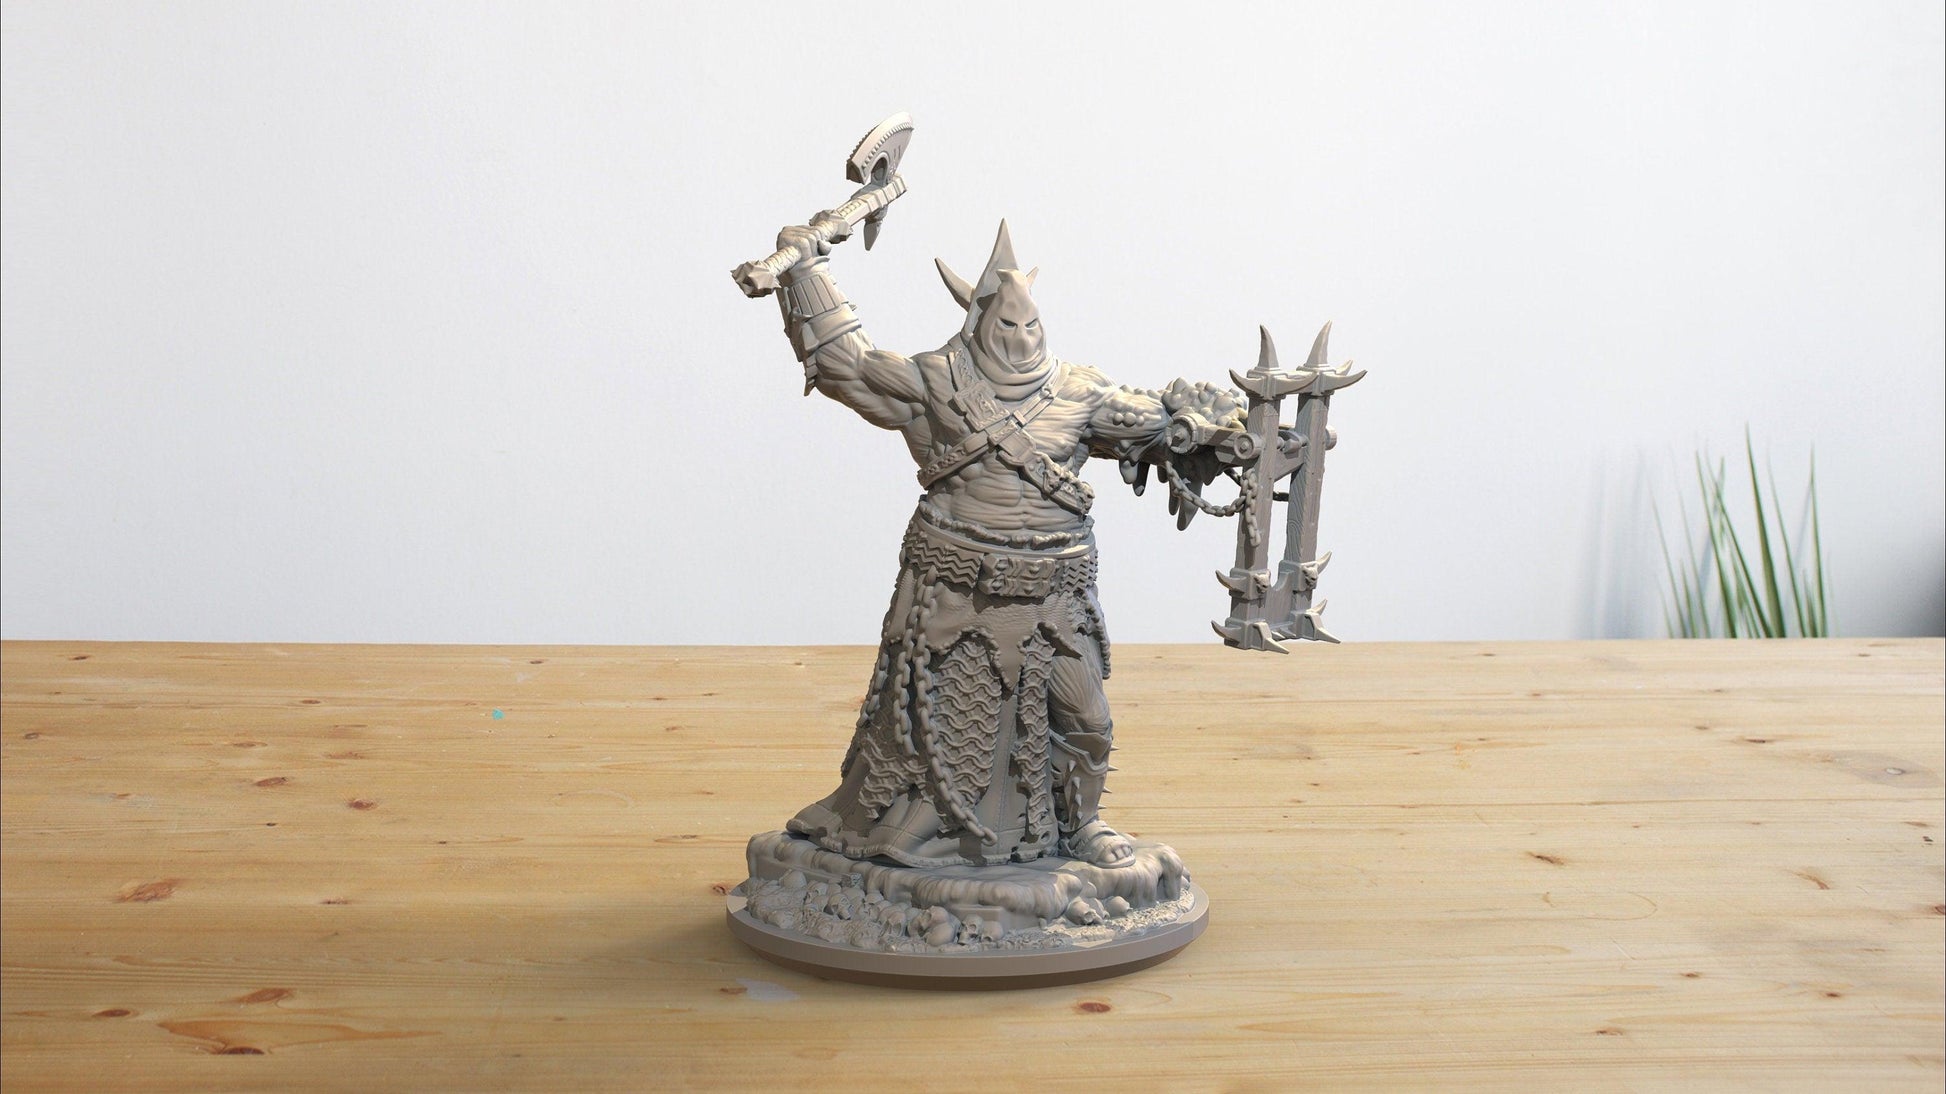 Cult Executioner miniature | Clay Cyanide | Wrath of God | Tabletop Gaming | DnD Miniature | Dungeons and Dragons,wargaming - Plague Miniatures shop for DnD Miniatures